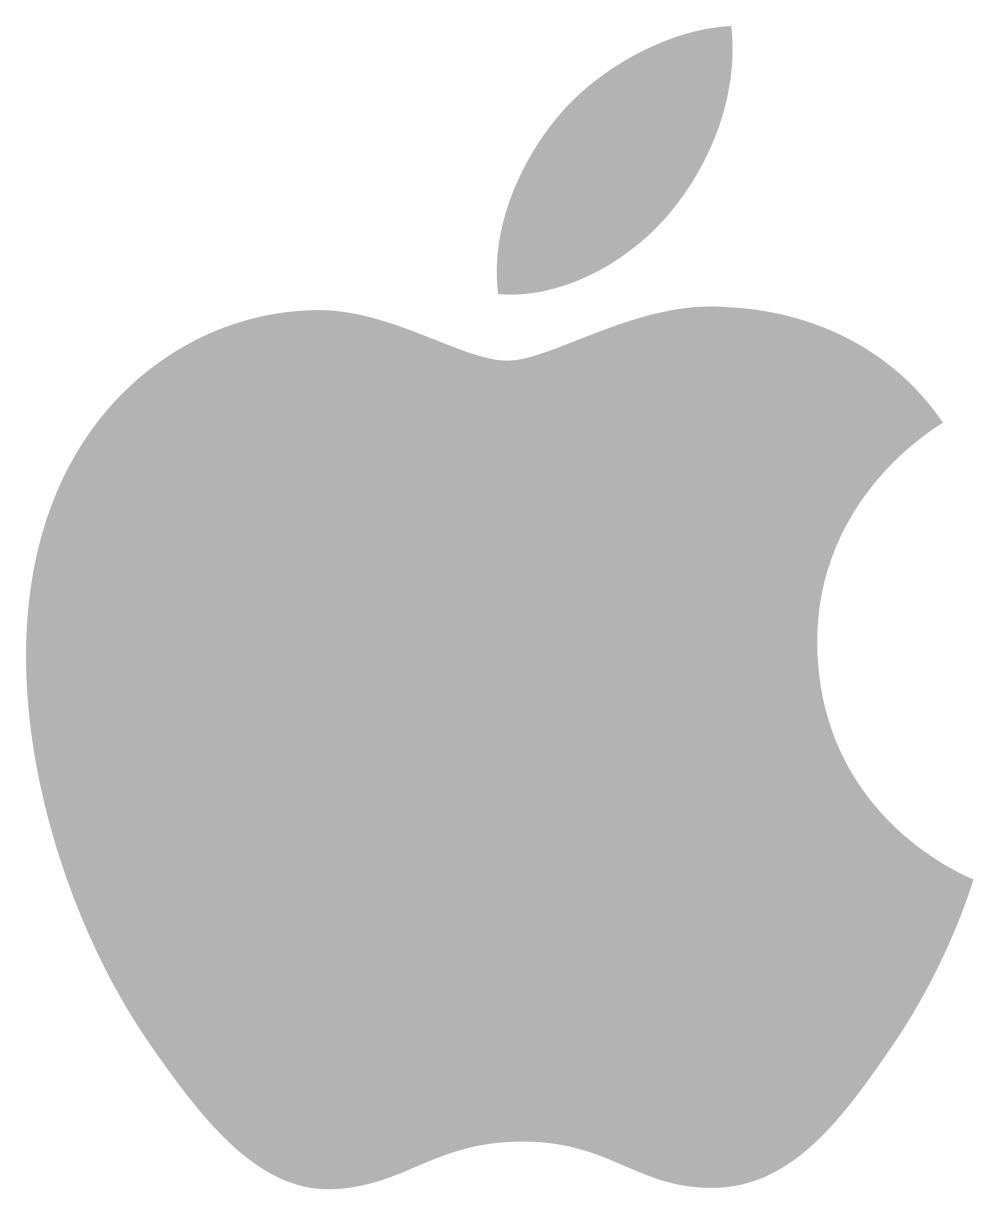 Logo Apple Scalable Vector Graphics - Apple logo PNG png download ...